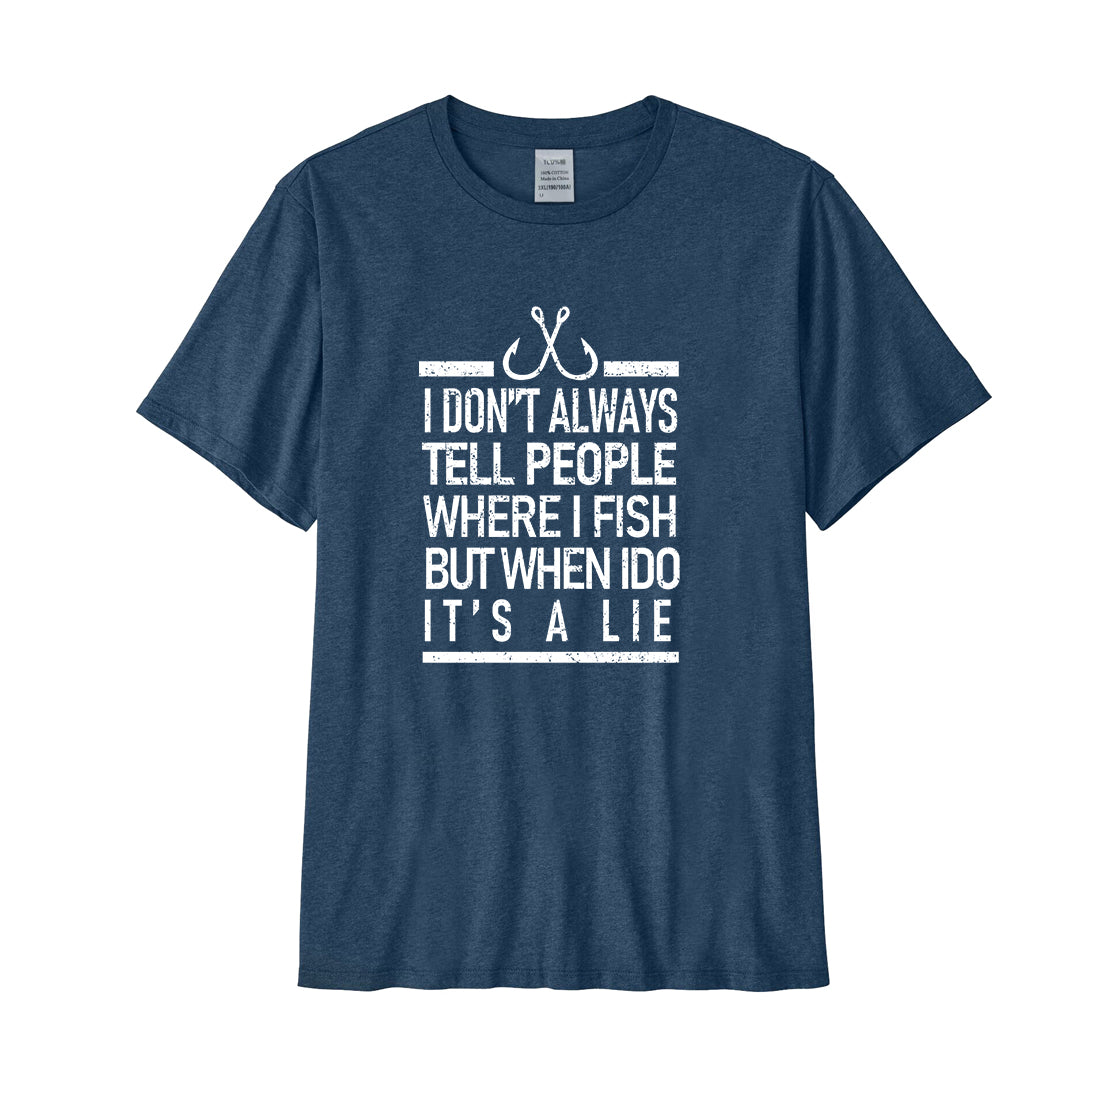 NOT TELL PEOPLE WHERE I FISH Performance T-Shirt